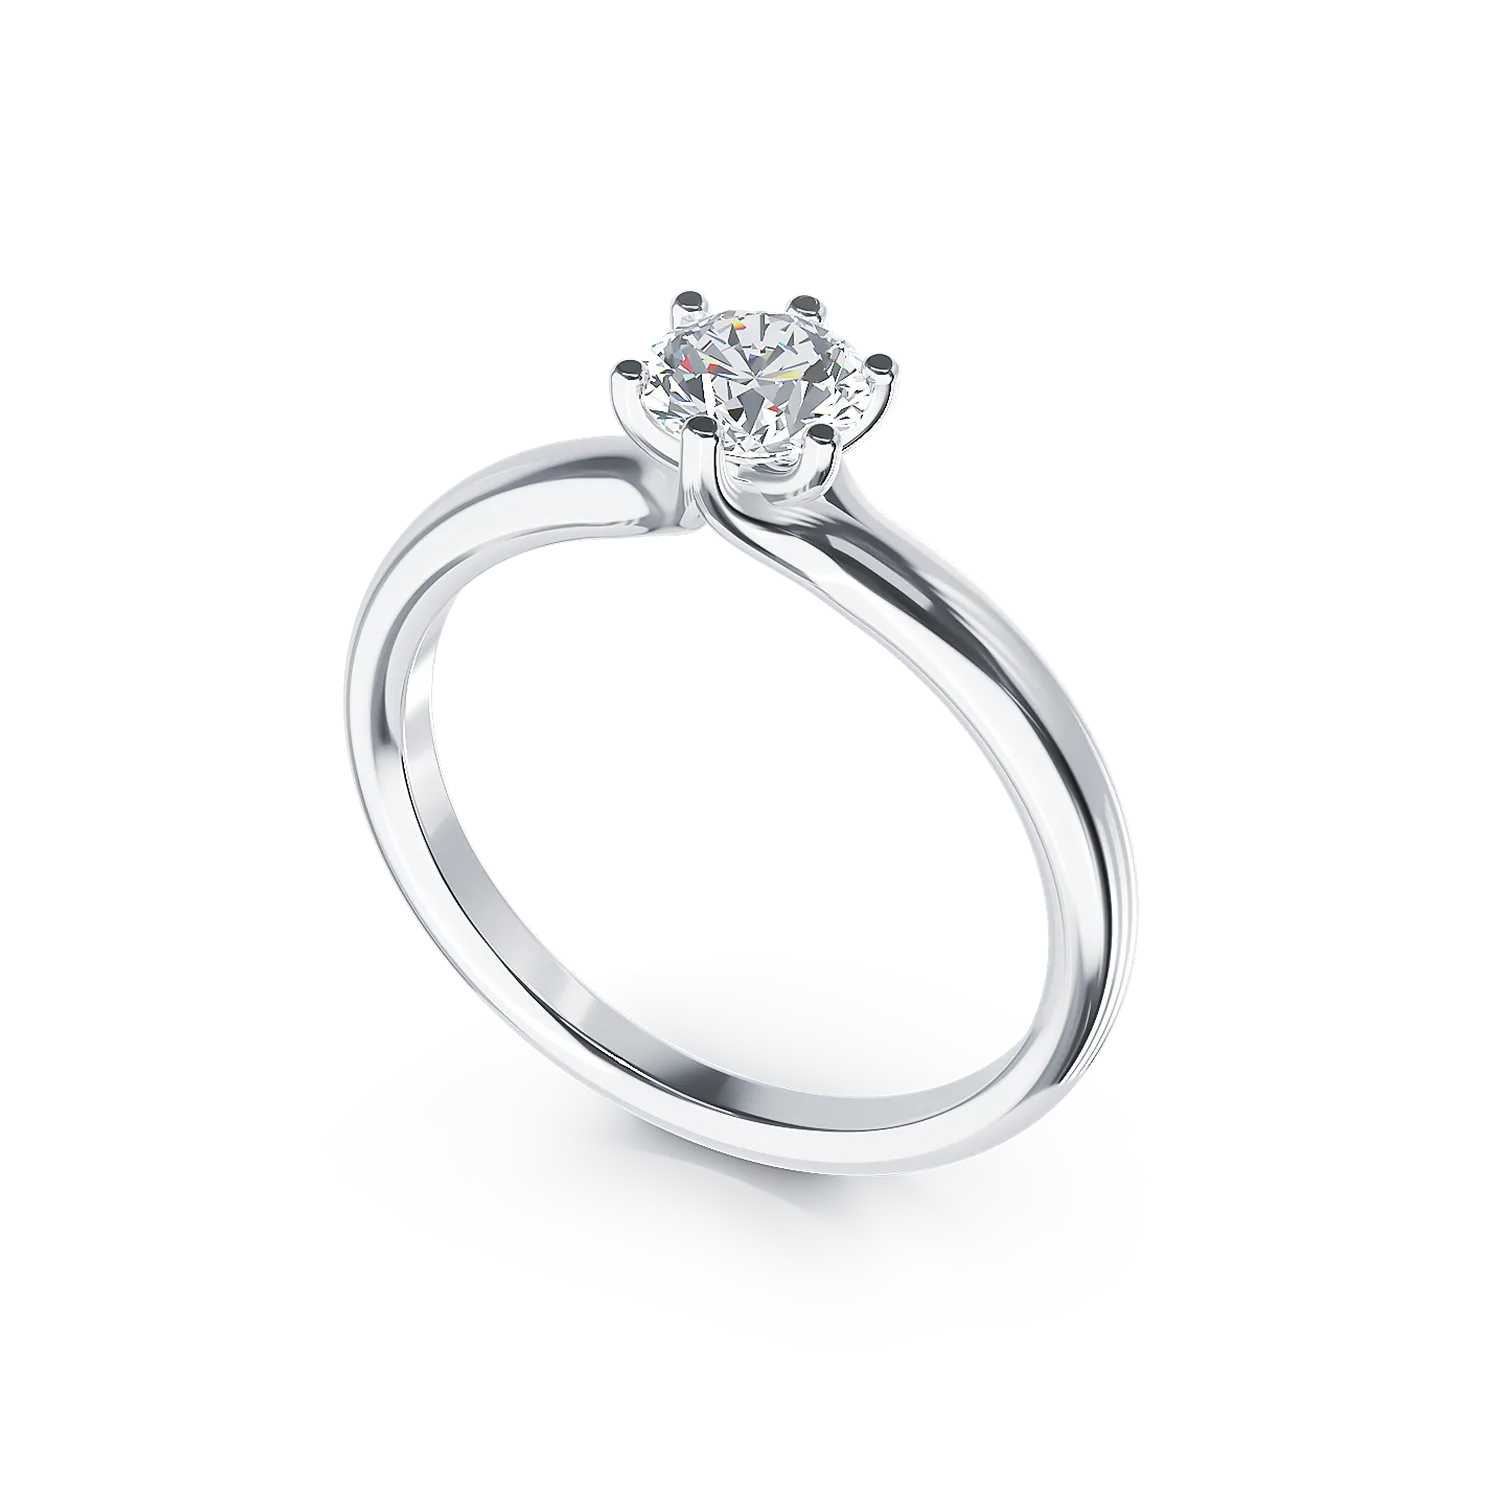 18K white gold engagement ring with a 0.5ct solitaire diamond